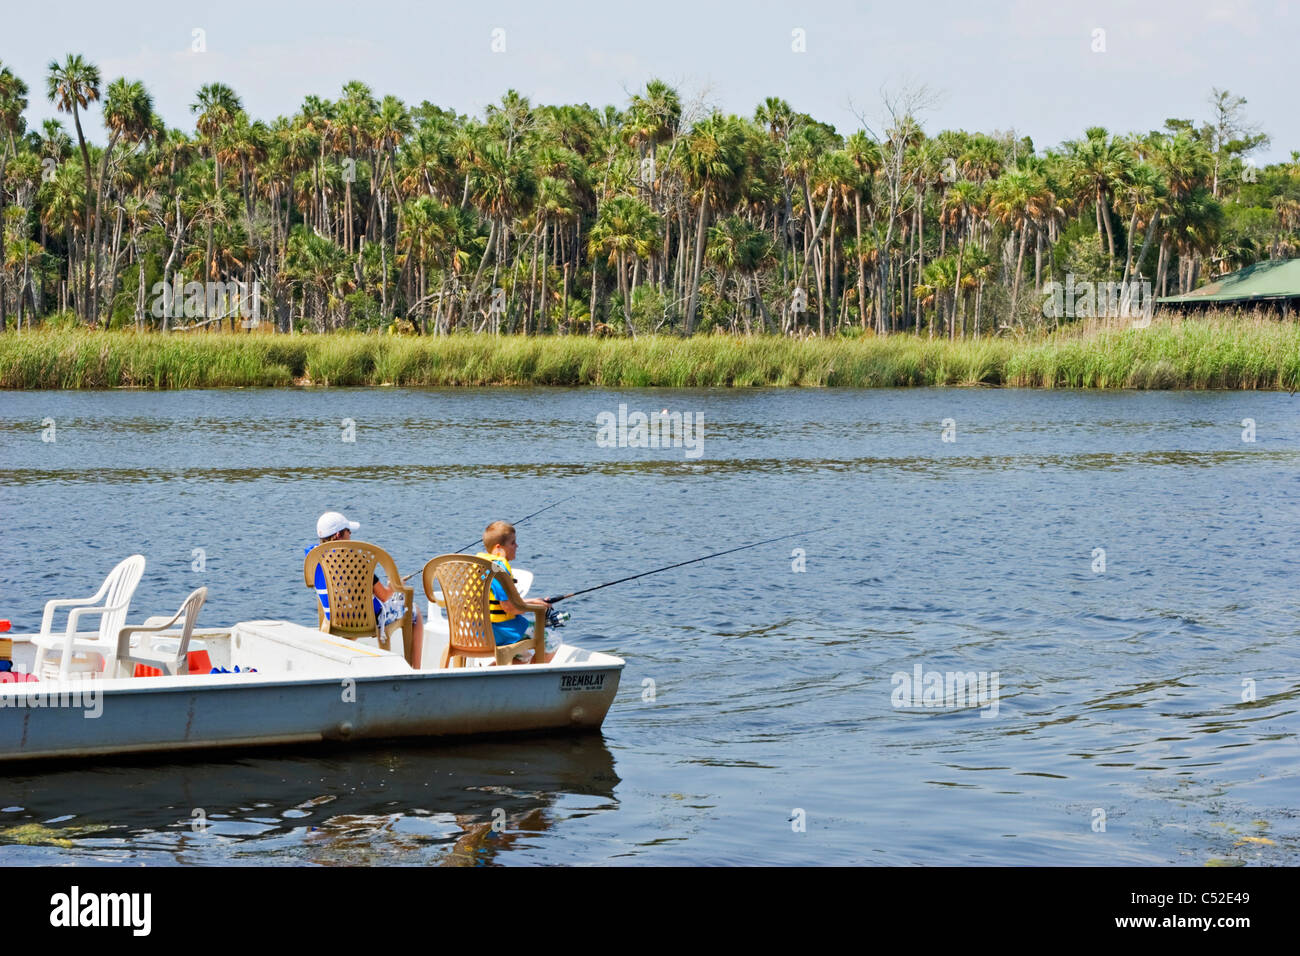 Two young boys fishing from boat in Florida gulf coast Chassahowitzka river Stock Photo